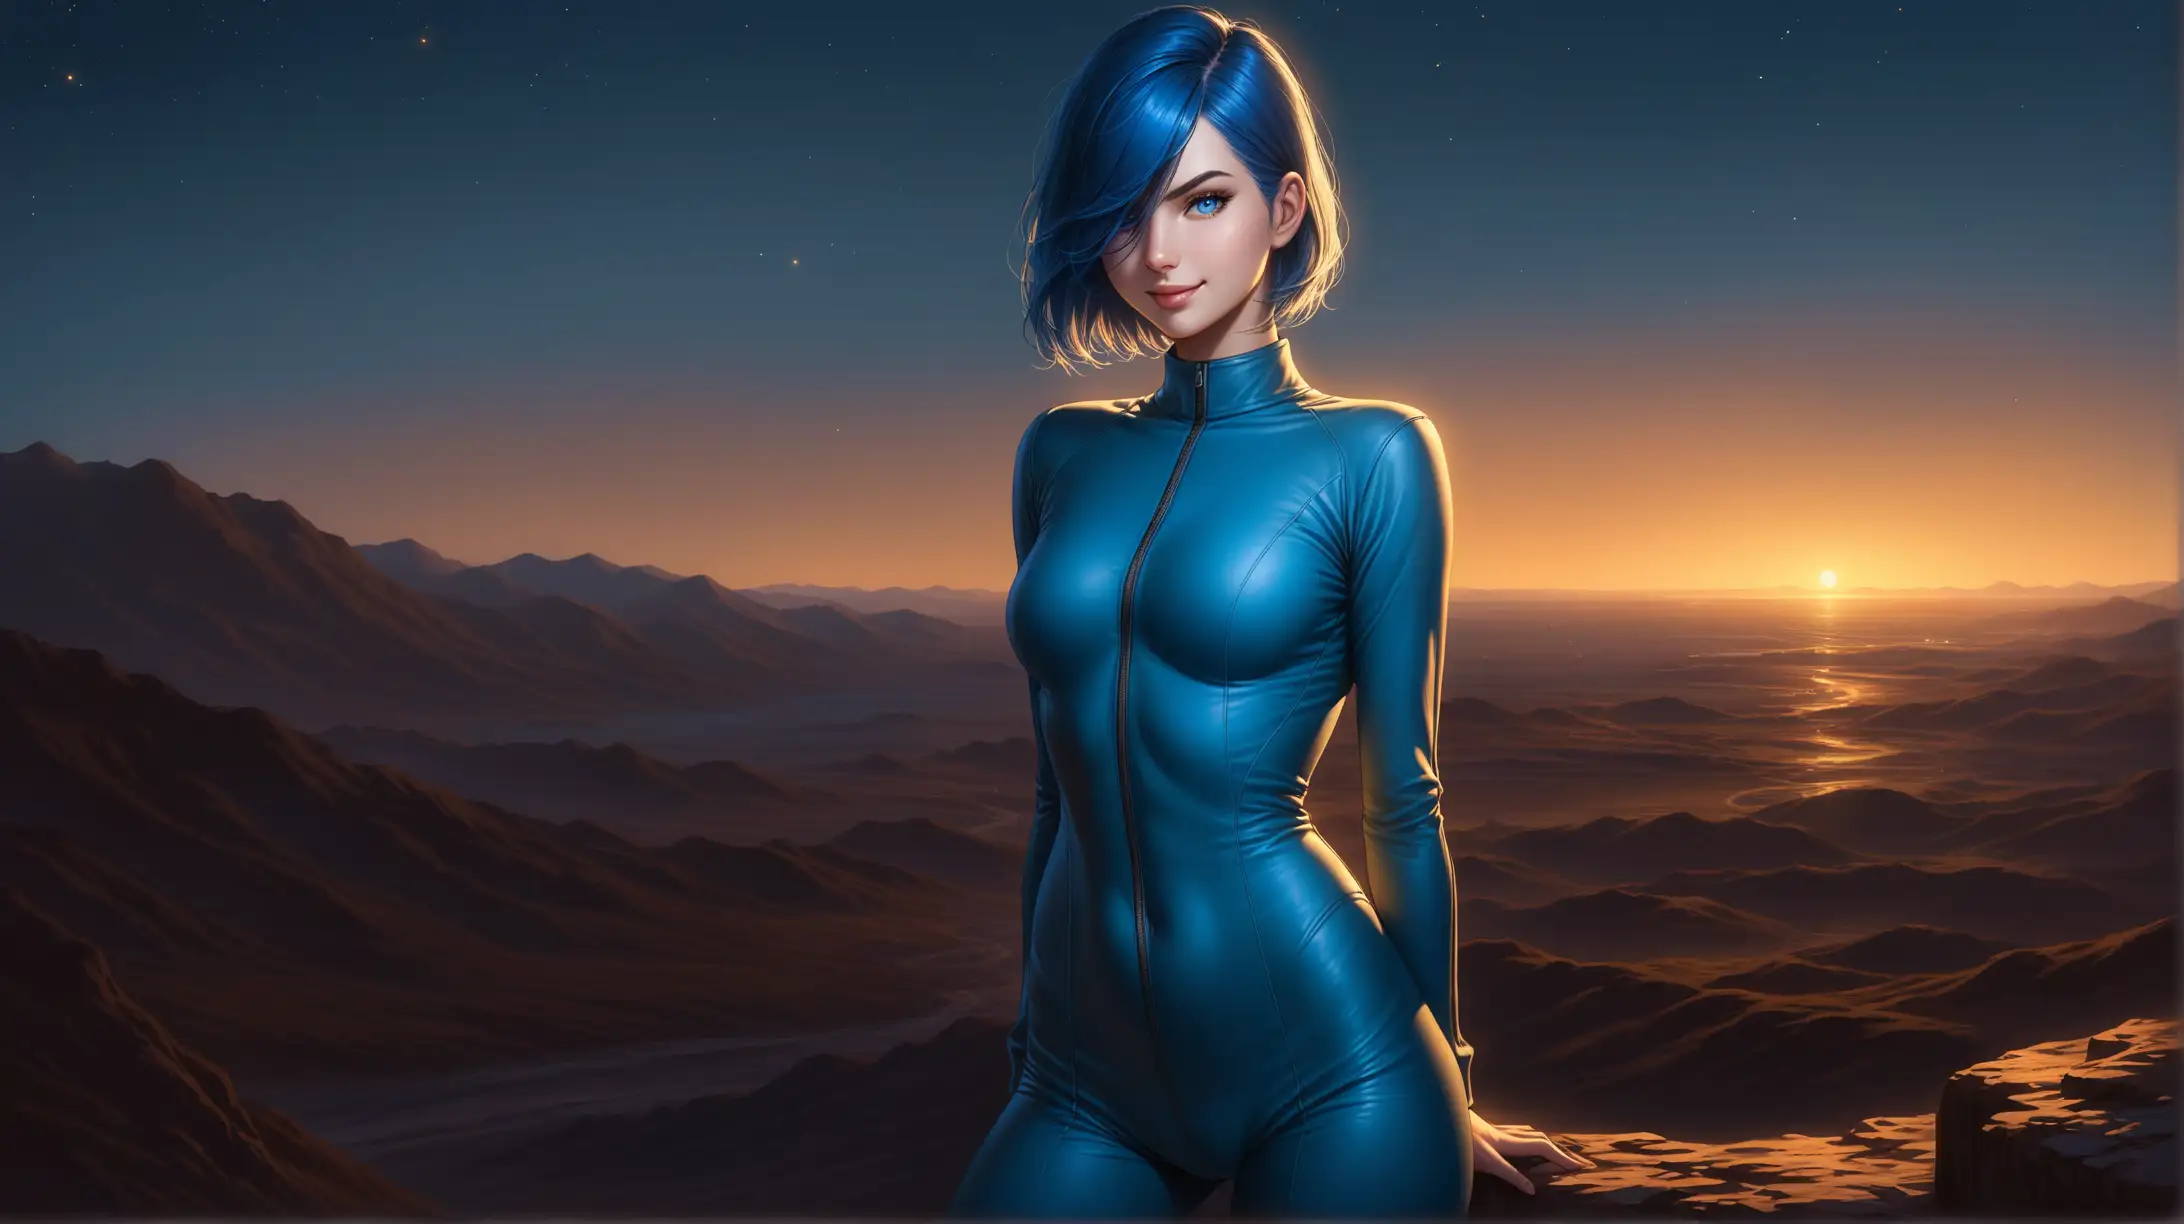 Seductive Woman with Blue Hair in FalloutInspired Outfit Under Night Lighting